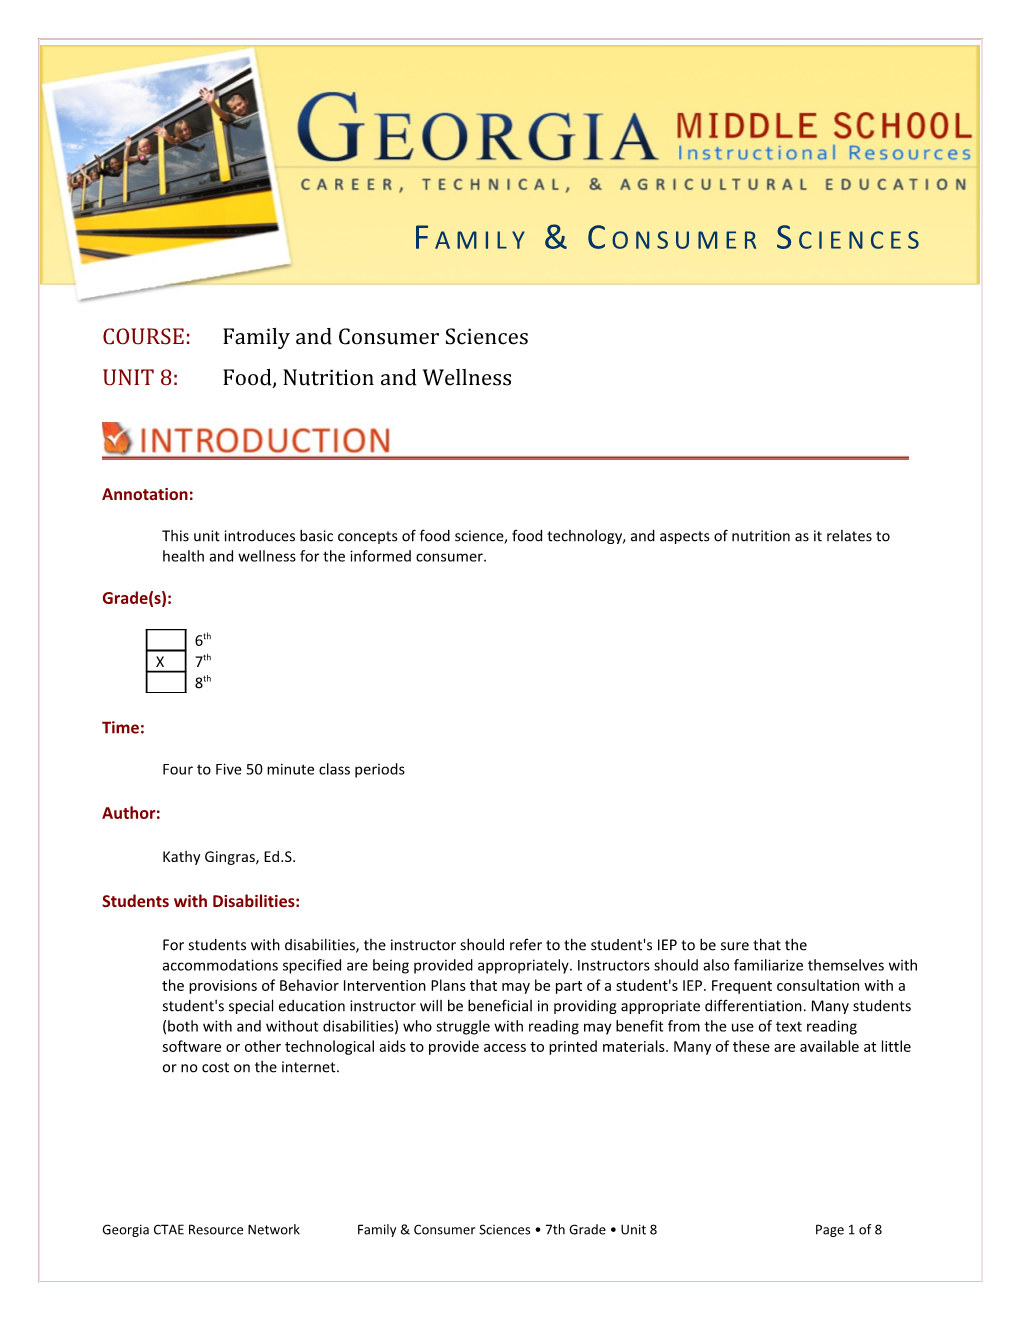 COURSE:Family and Consumer Sciences